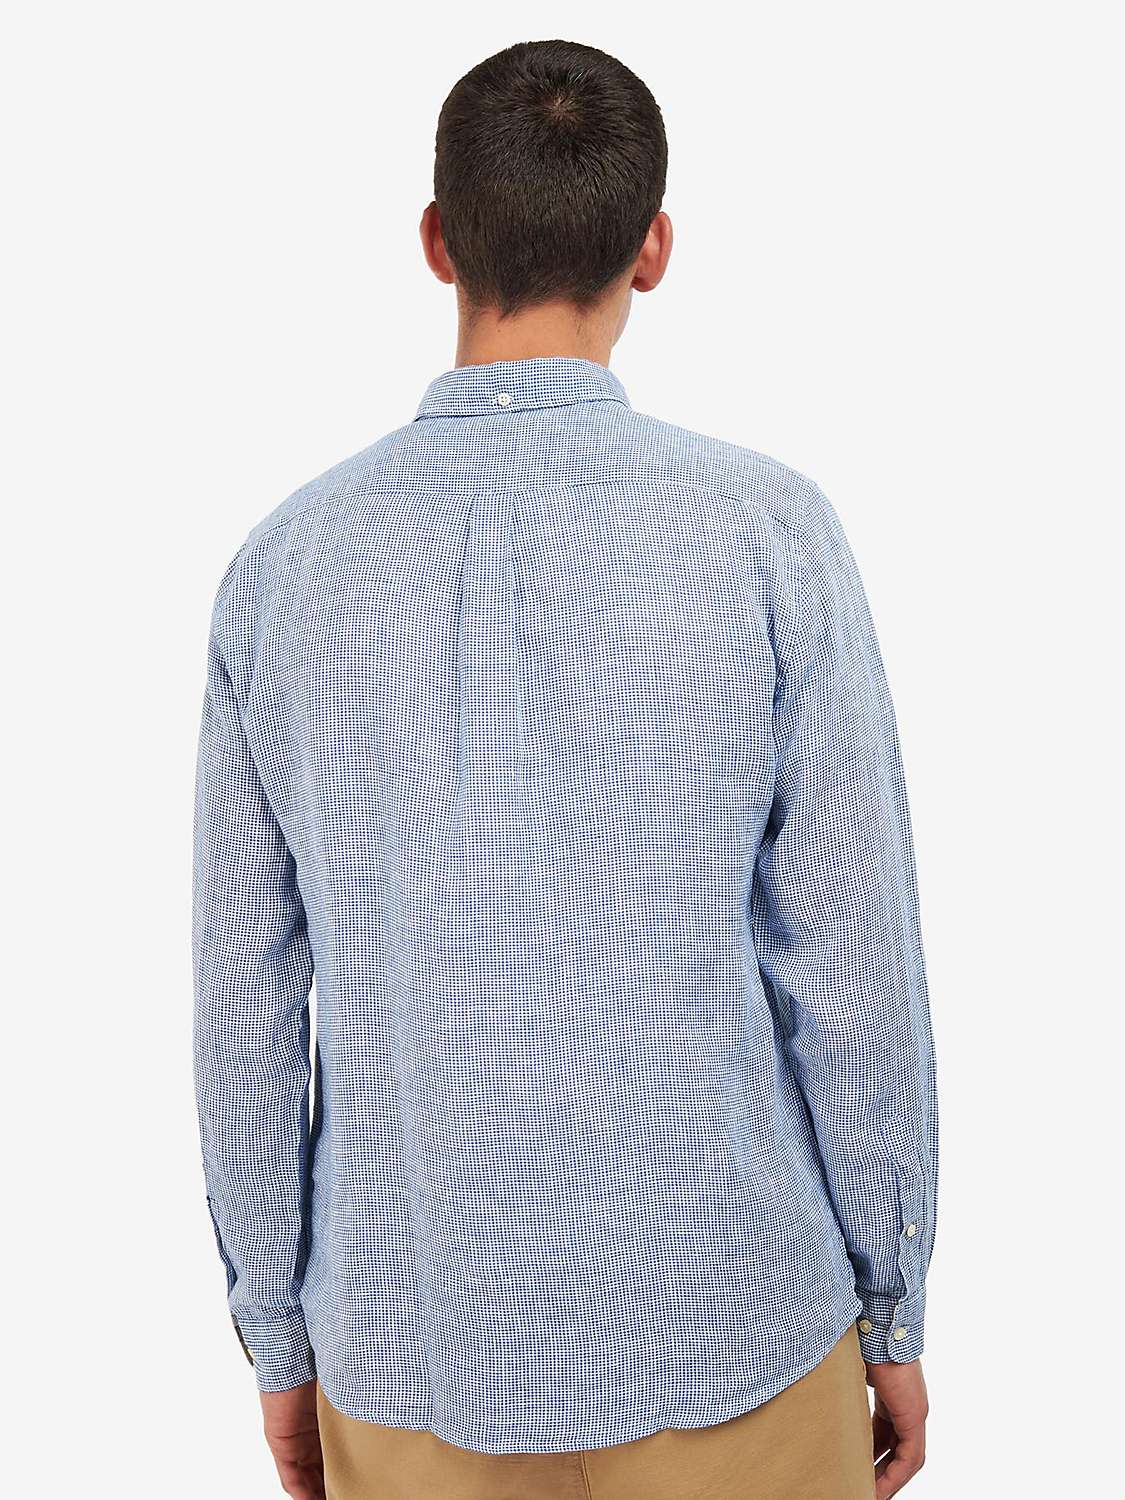 Buy Barbour Linton Tailored Long Sleeve Shirt, Navy Online at johnlewis.com